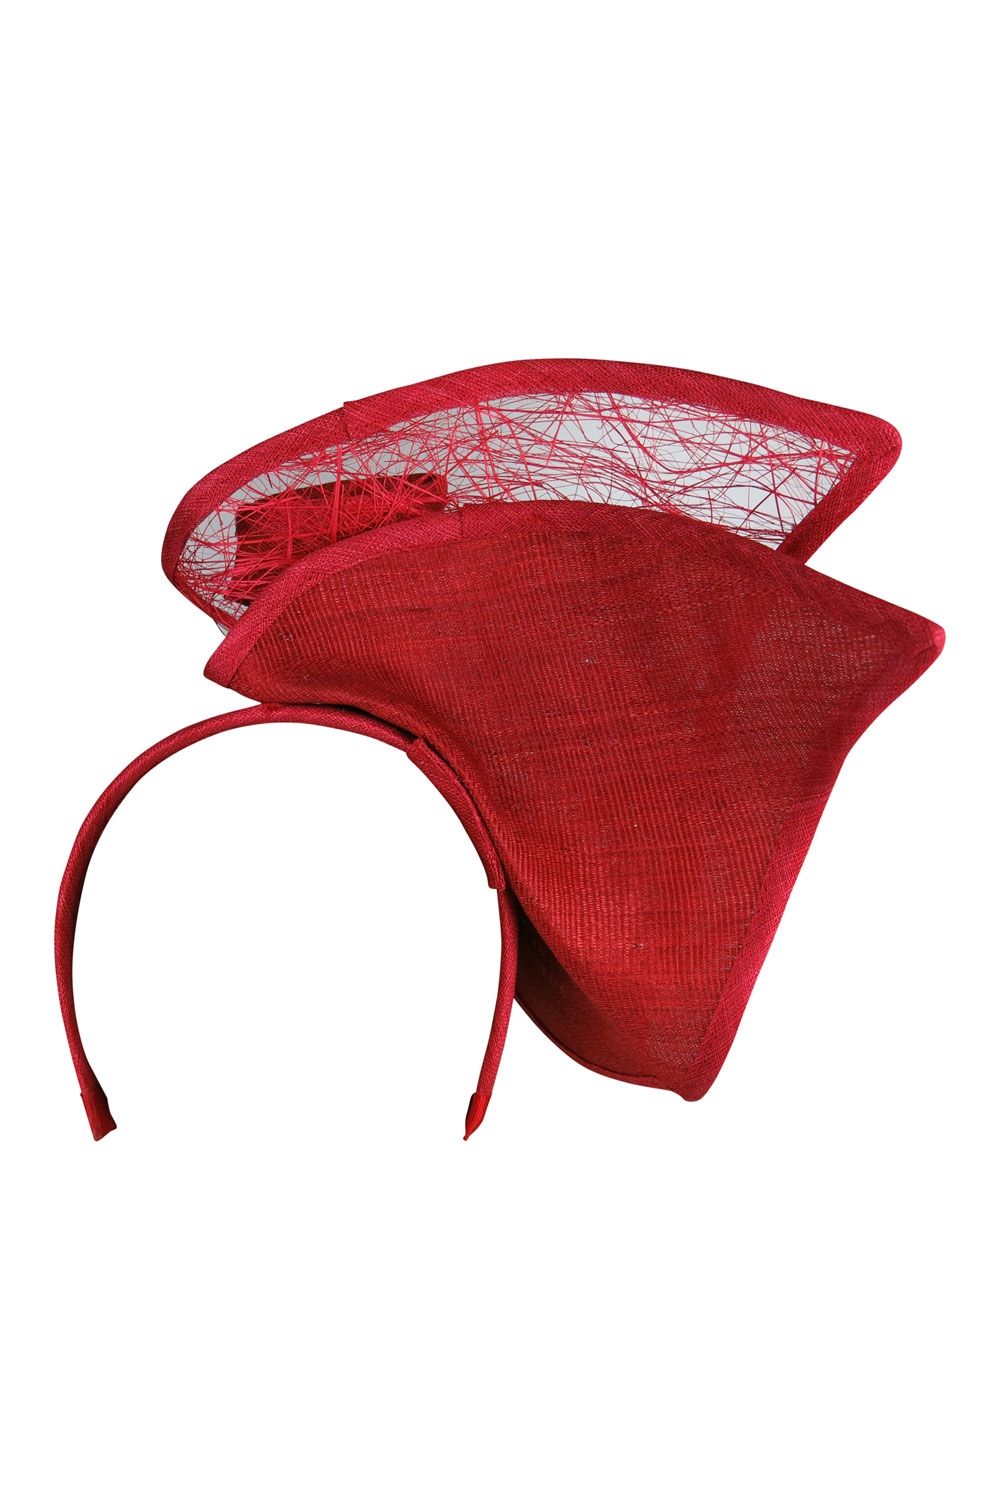 Morgan and Taylor - Addison Fascinator - Red - Back